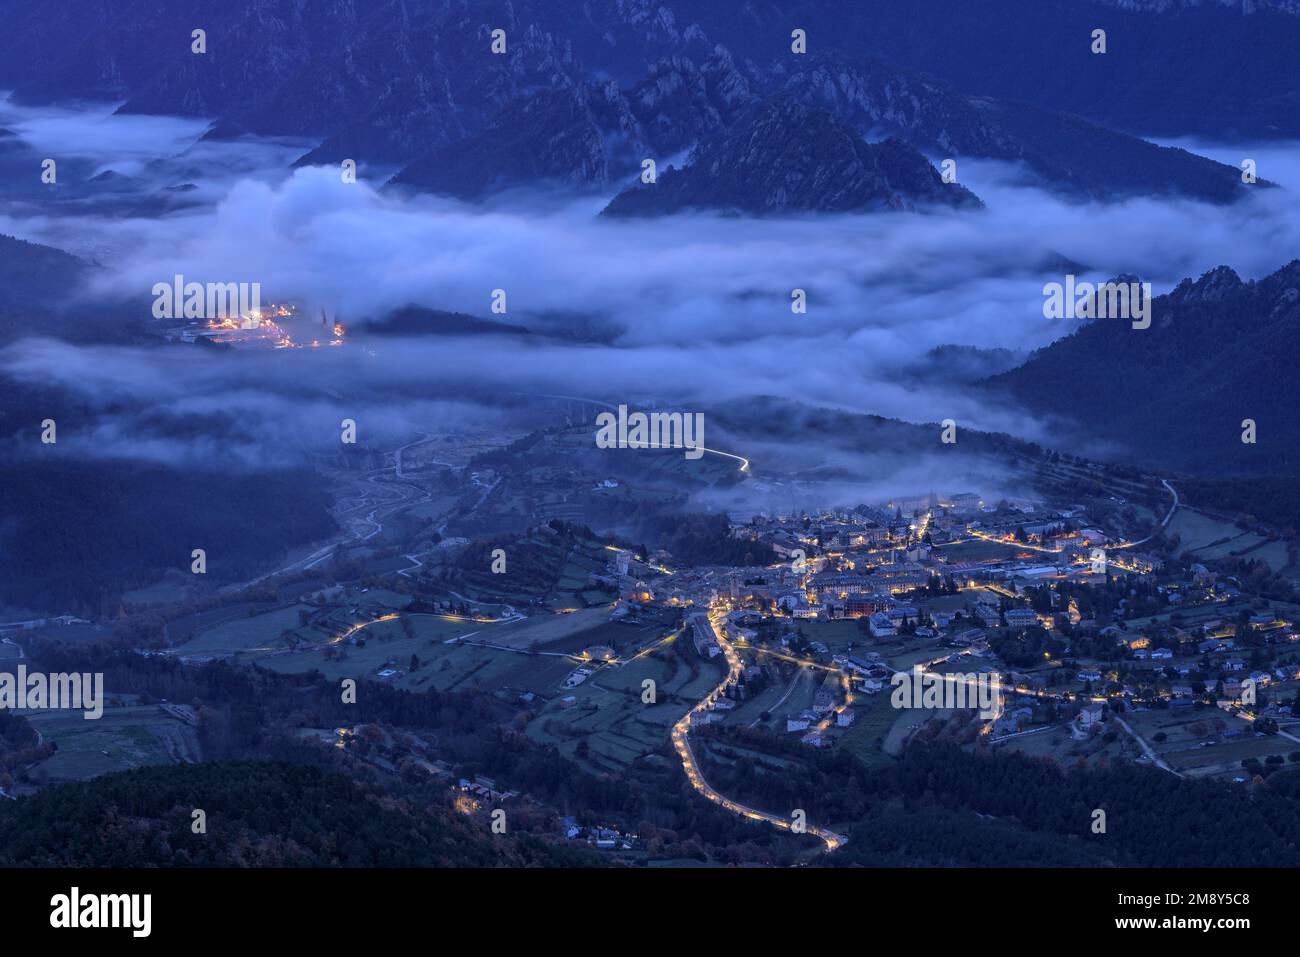 Sunrise in Vall de Lord valley with fog over the reservoir near Sant Llorenç de Morunys village. Seen from Port del Comte (Lleida, Catalonia, Spain) Stock Photo